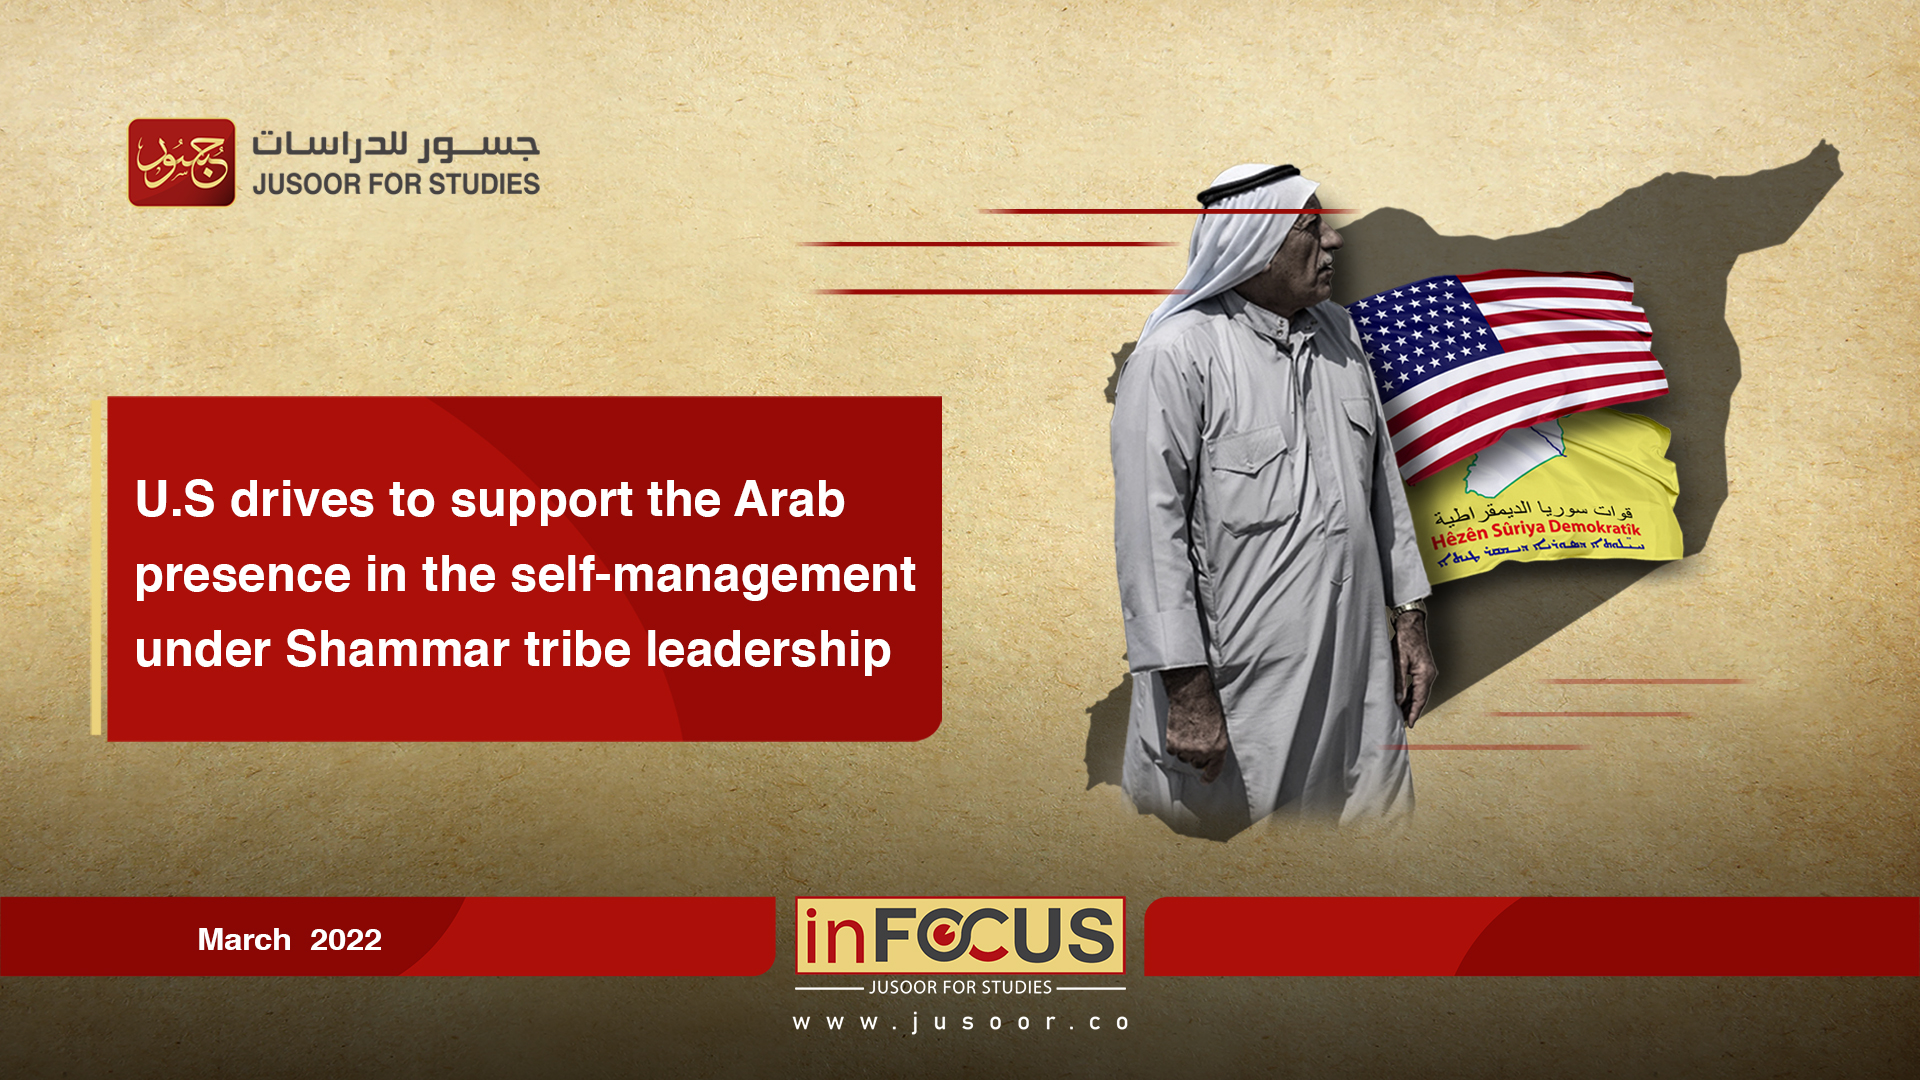 U.S drives to support the Arab presence in the self-management under Shammar tribe leadership